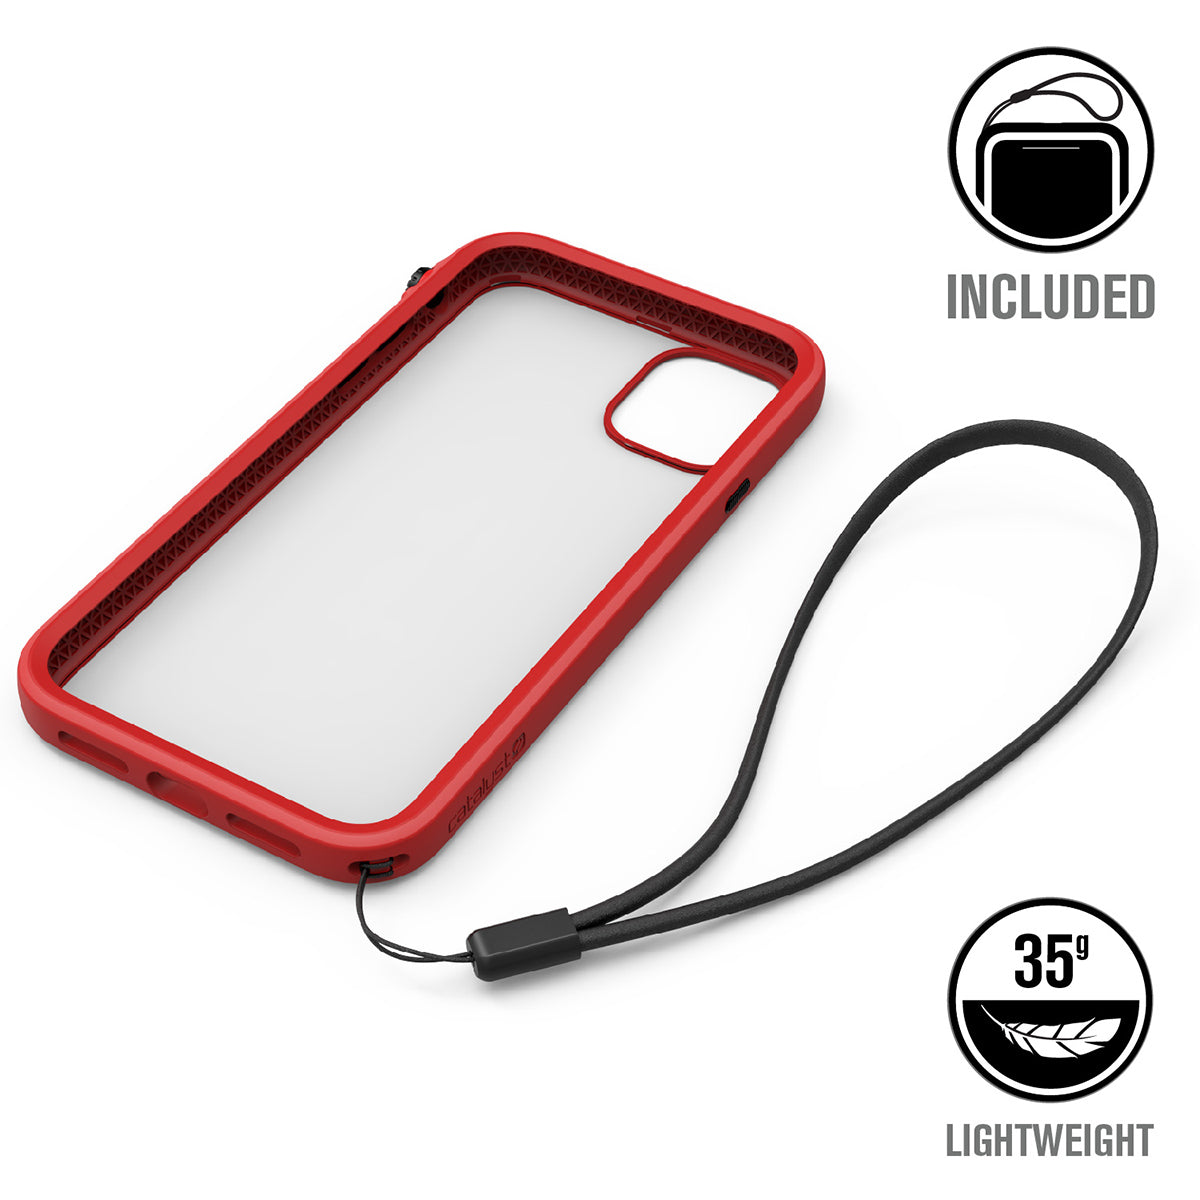 catalyst iPhone 11 series impact protection case empty flame red case for iPhone 11 with a lanyard text reads included 35g lightweight